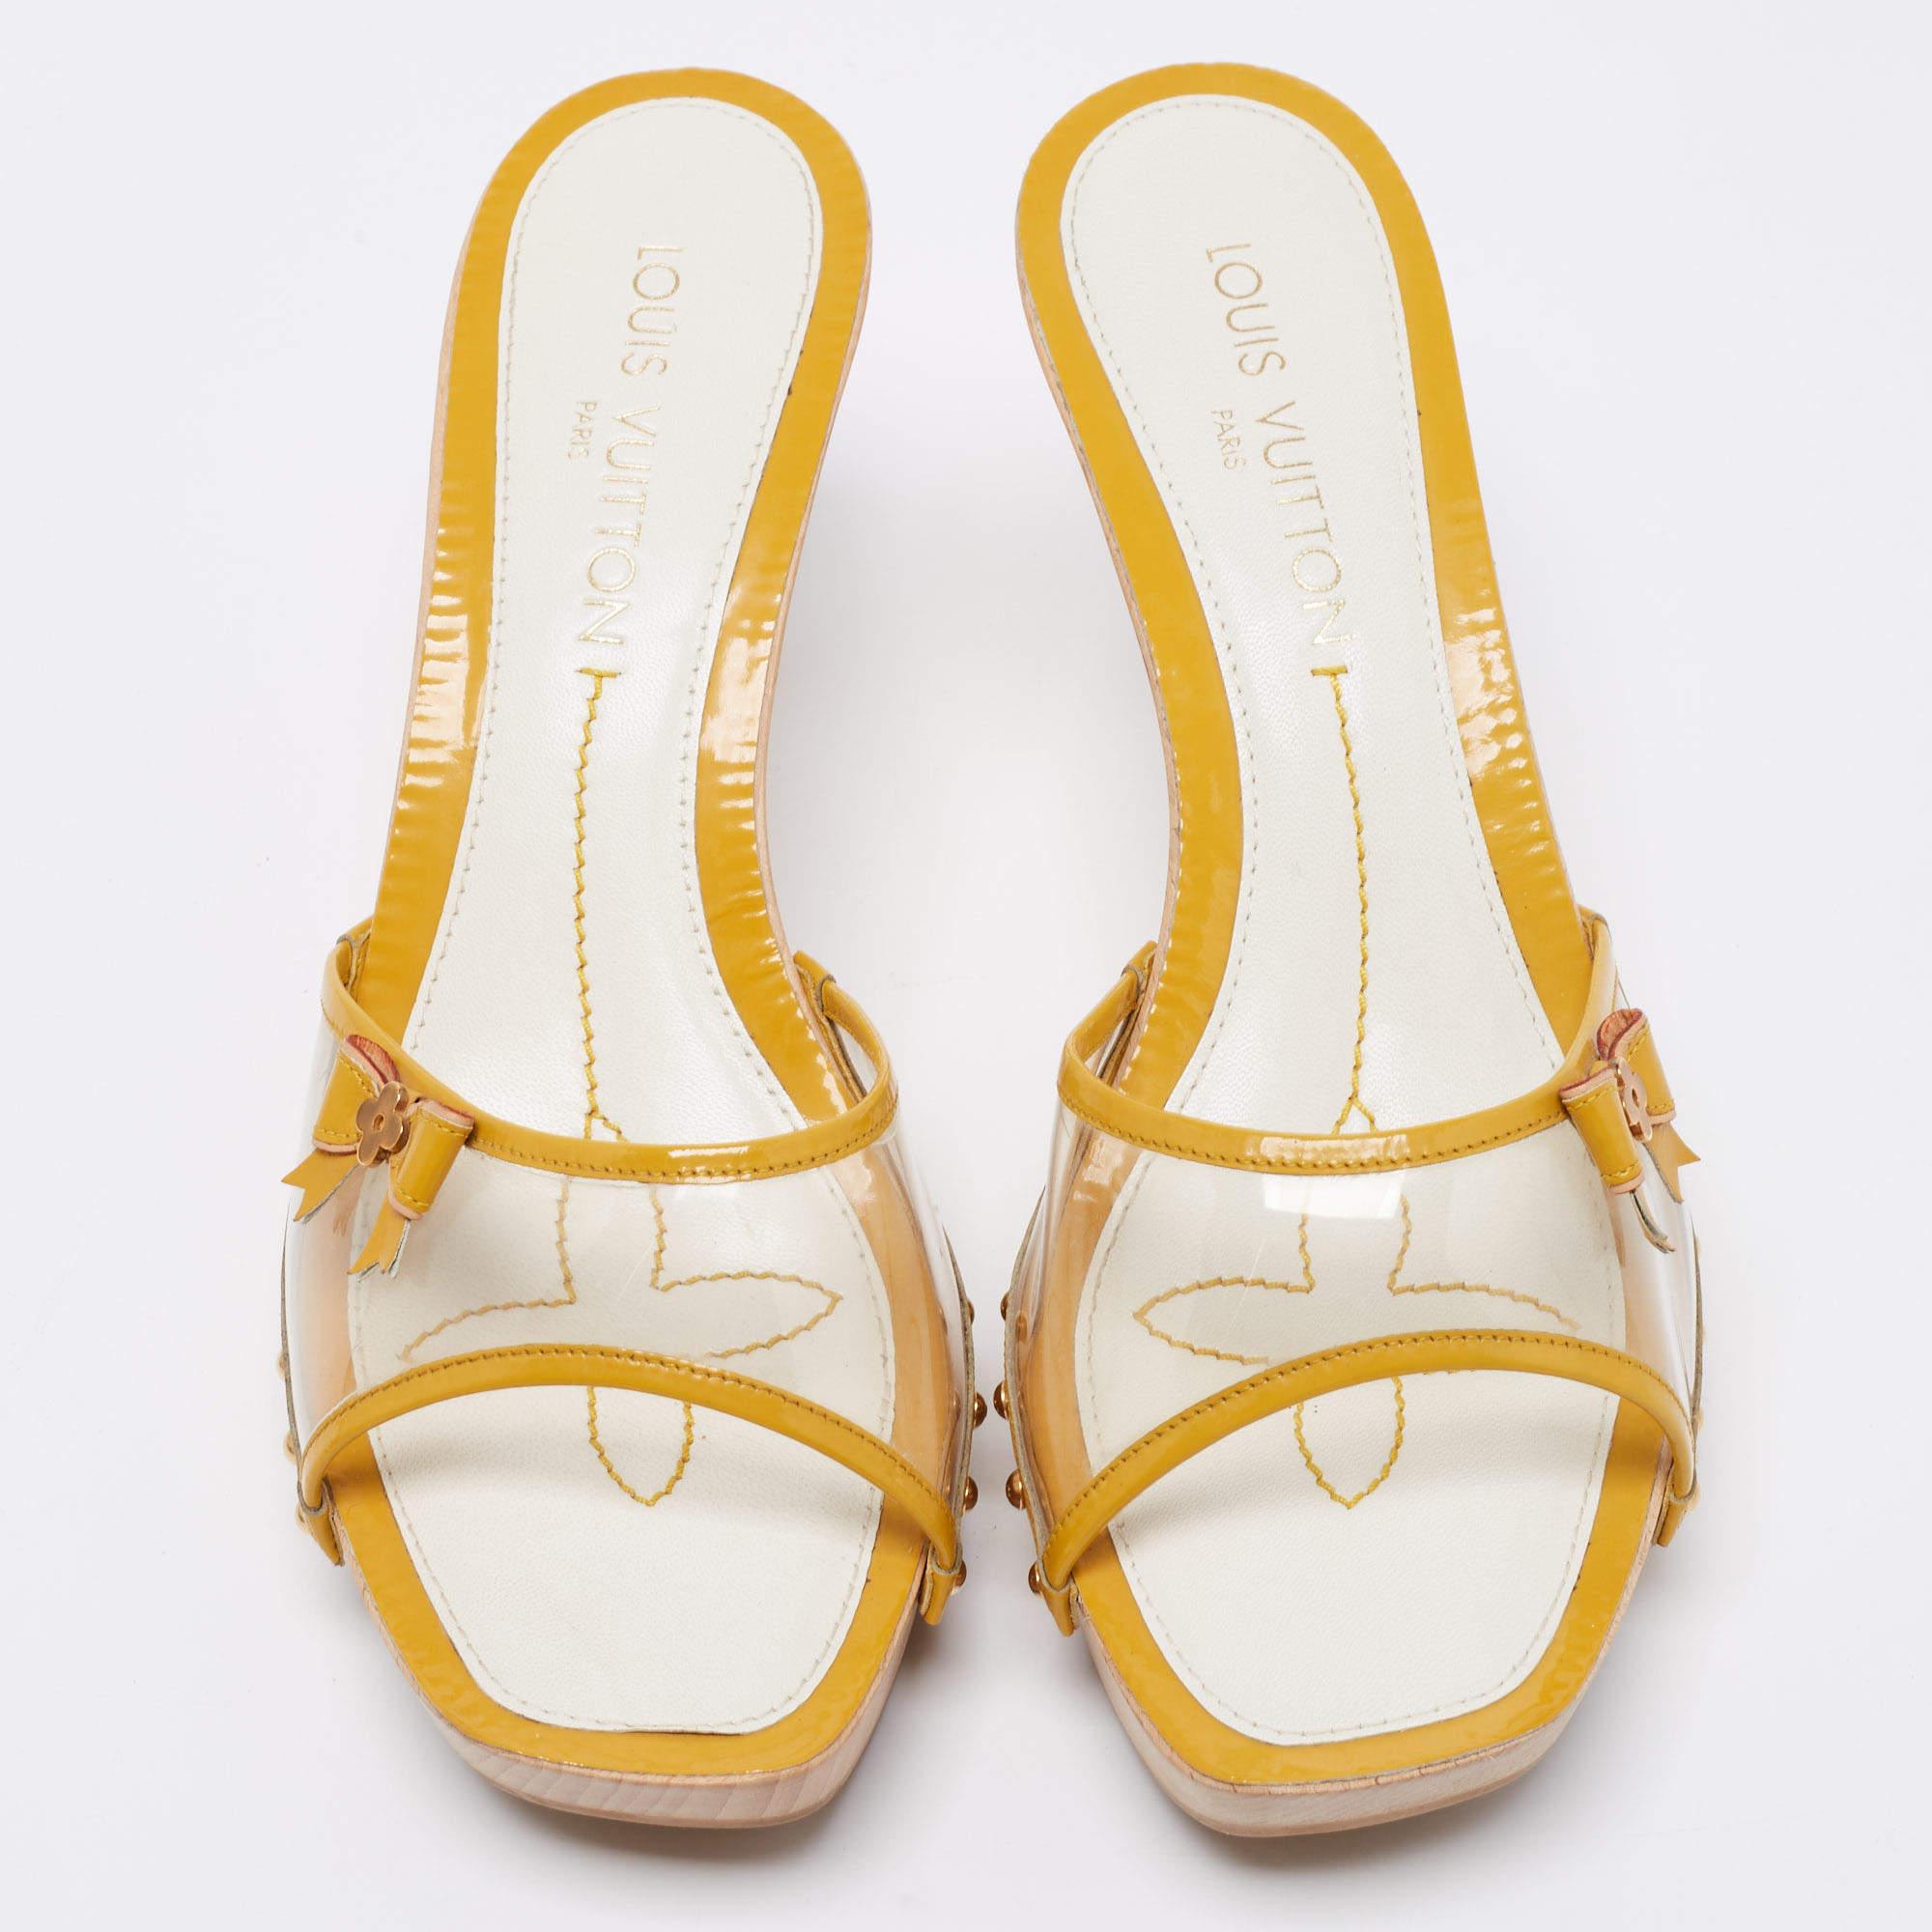 Pretty and minimal, these Louis Vuitton sandals tops in highlighting the feminine charm. Crafted from patent leather, they feature open toes, PVC vamps, and delicate bow details on their sides. Elevated on 10 cm heels, they come with leather-lined